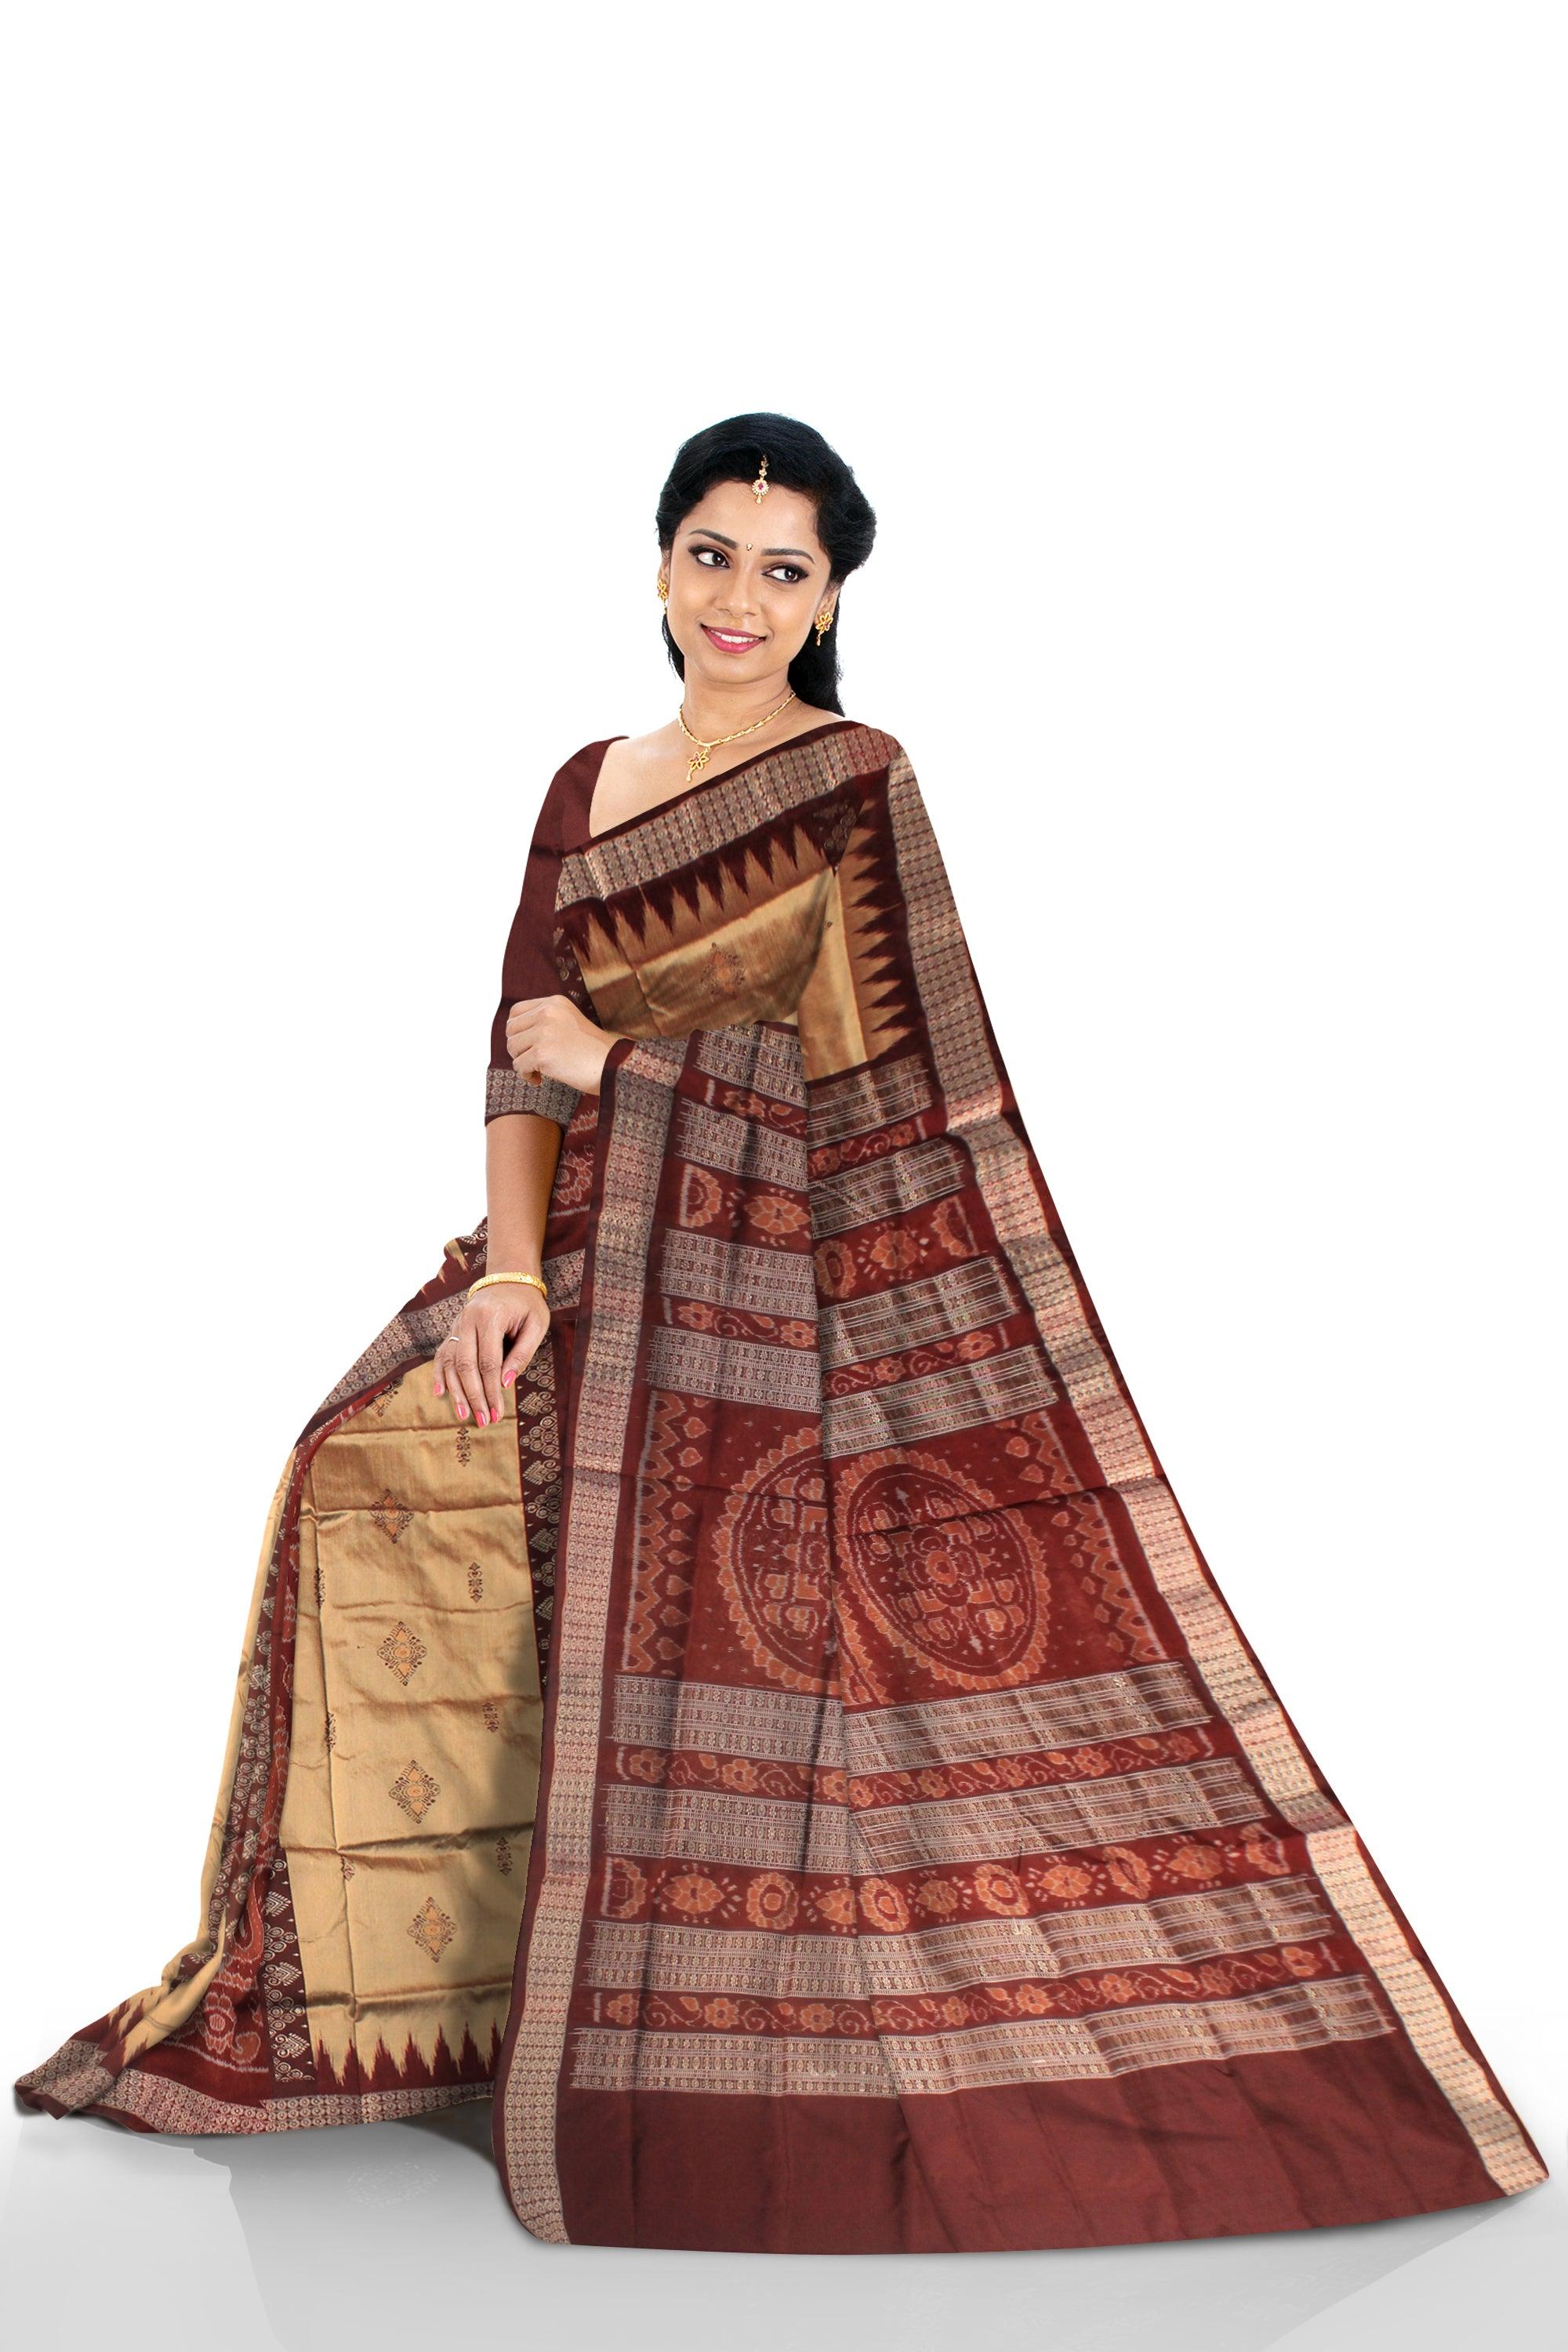 LATEST BUTTERFLY PATTERN DESIGN GOLDEN MAROON COLOR PATA SAREE, WITH BLOUSE PIECE. - Koshali Arts & Crafts Enterprise